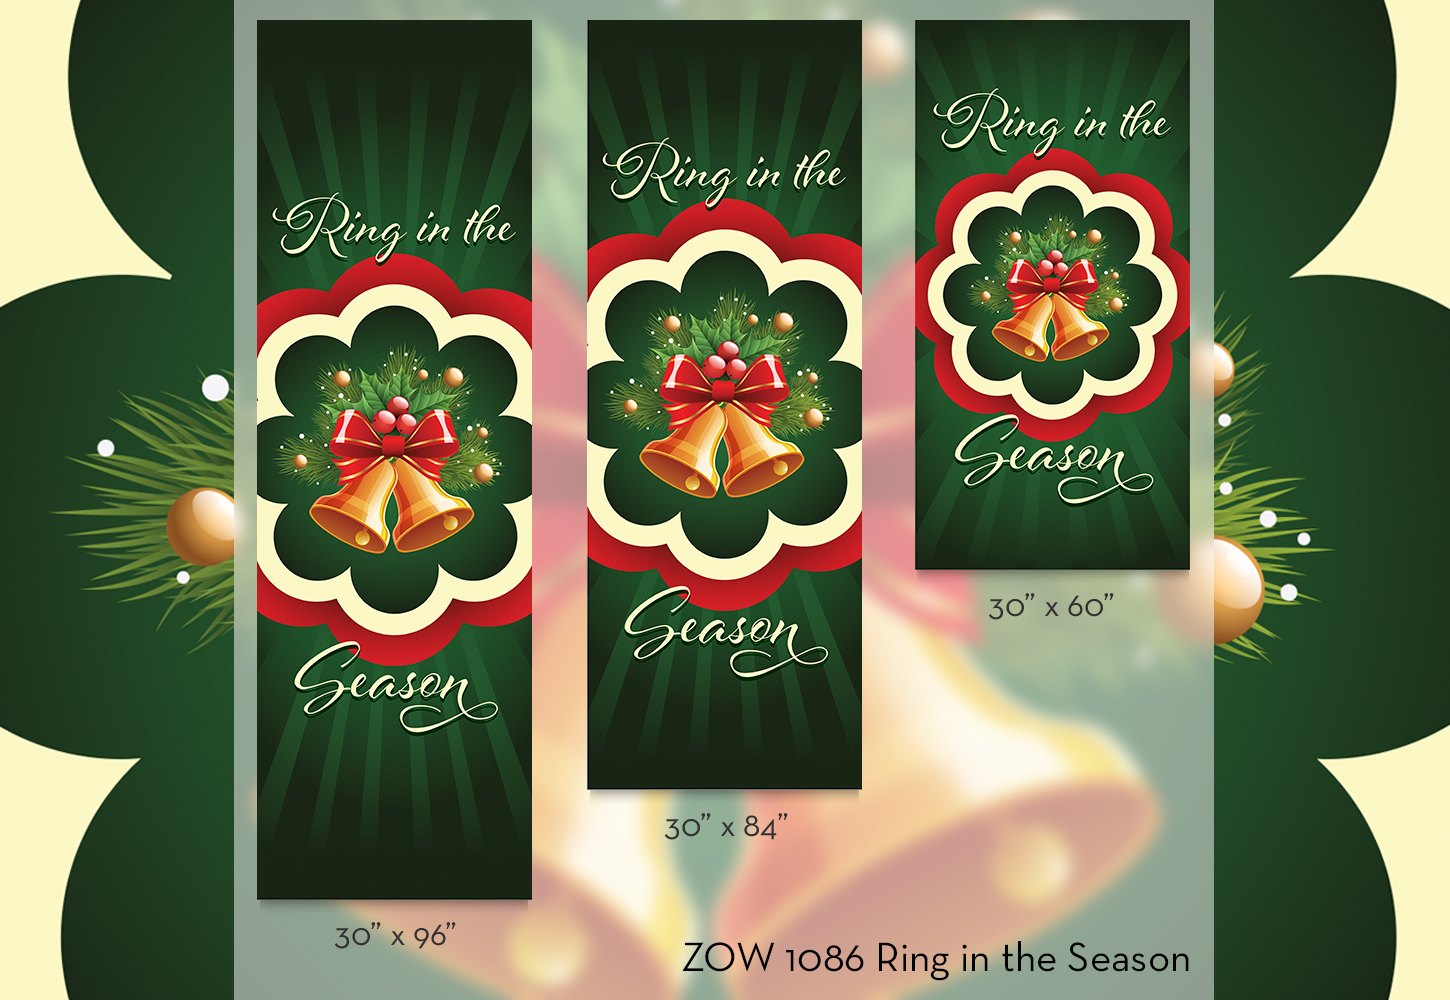 ZOW 1086 Ring in the Season